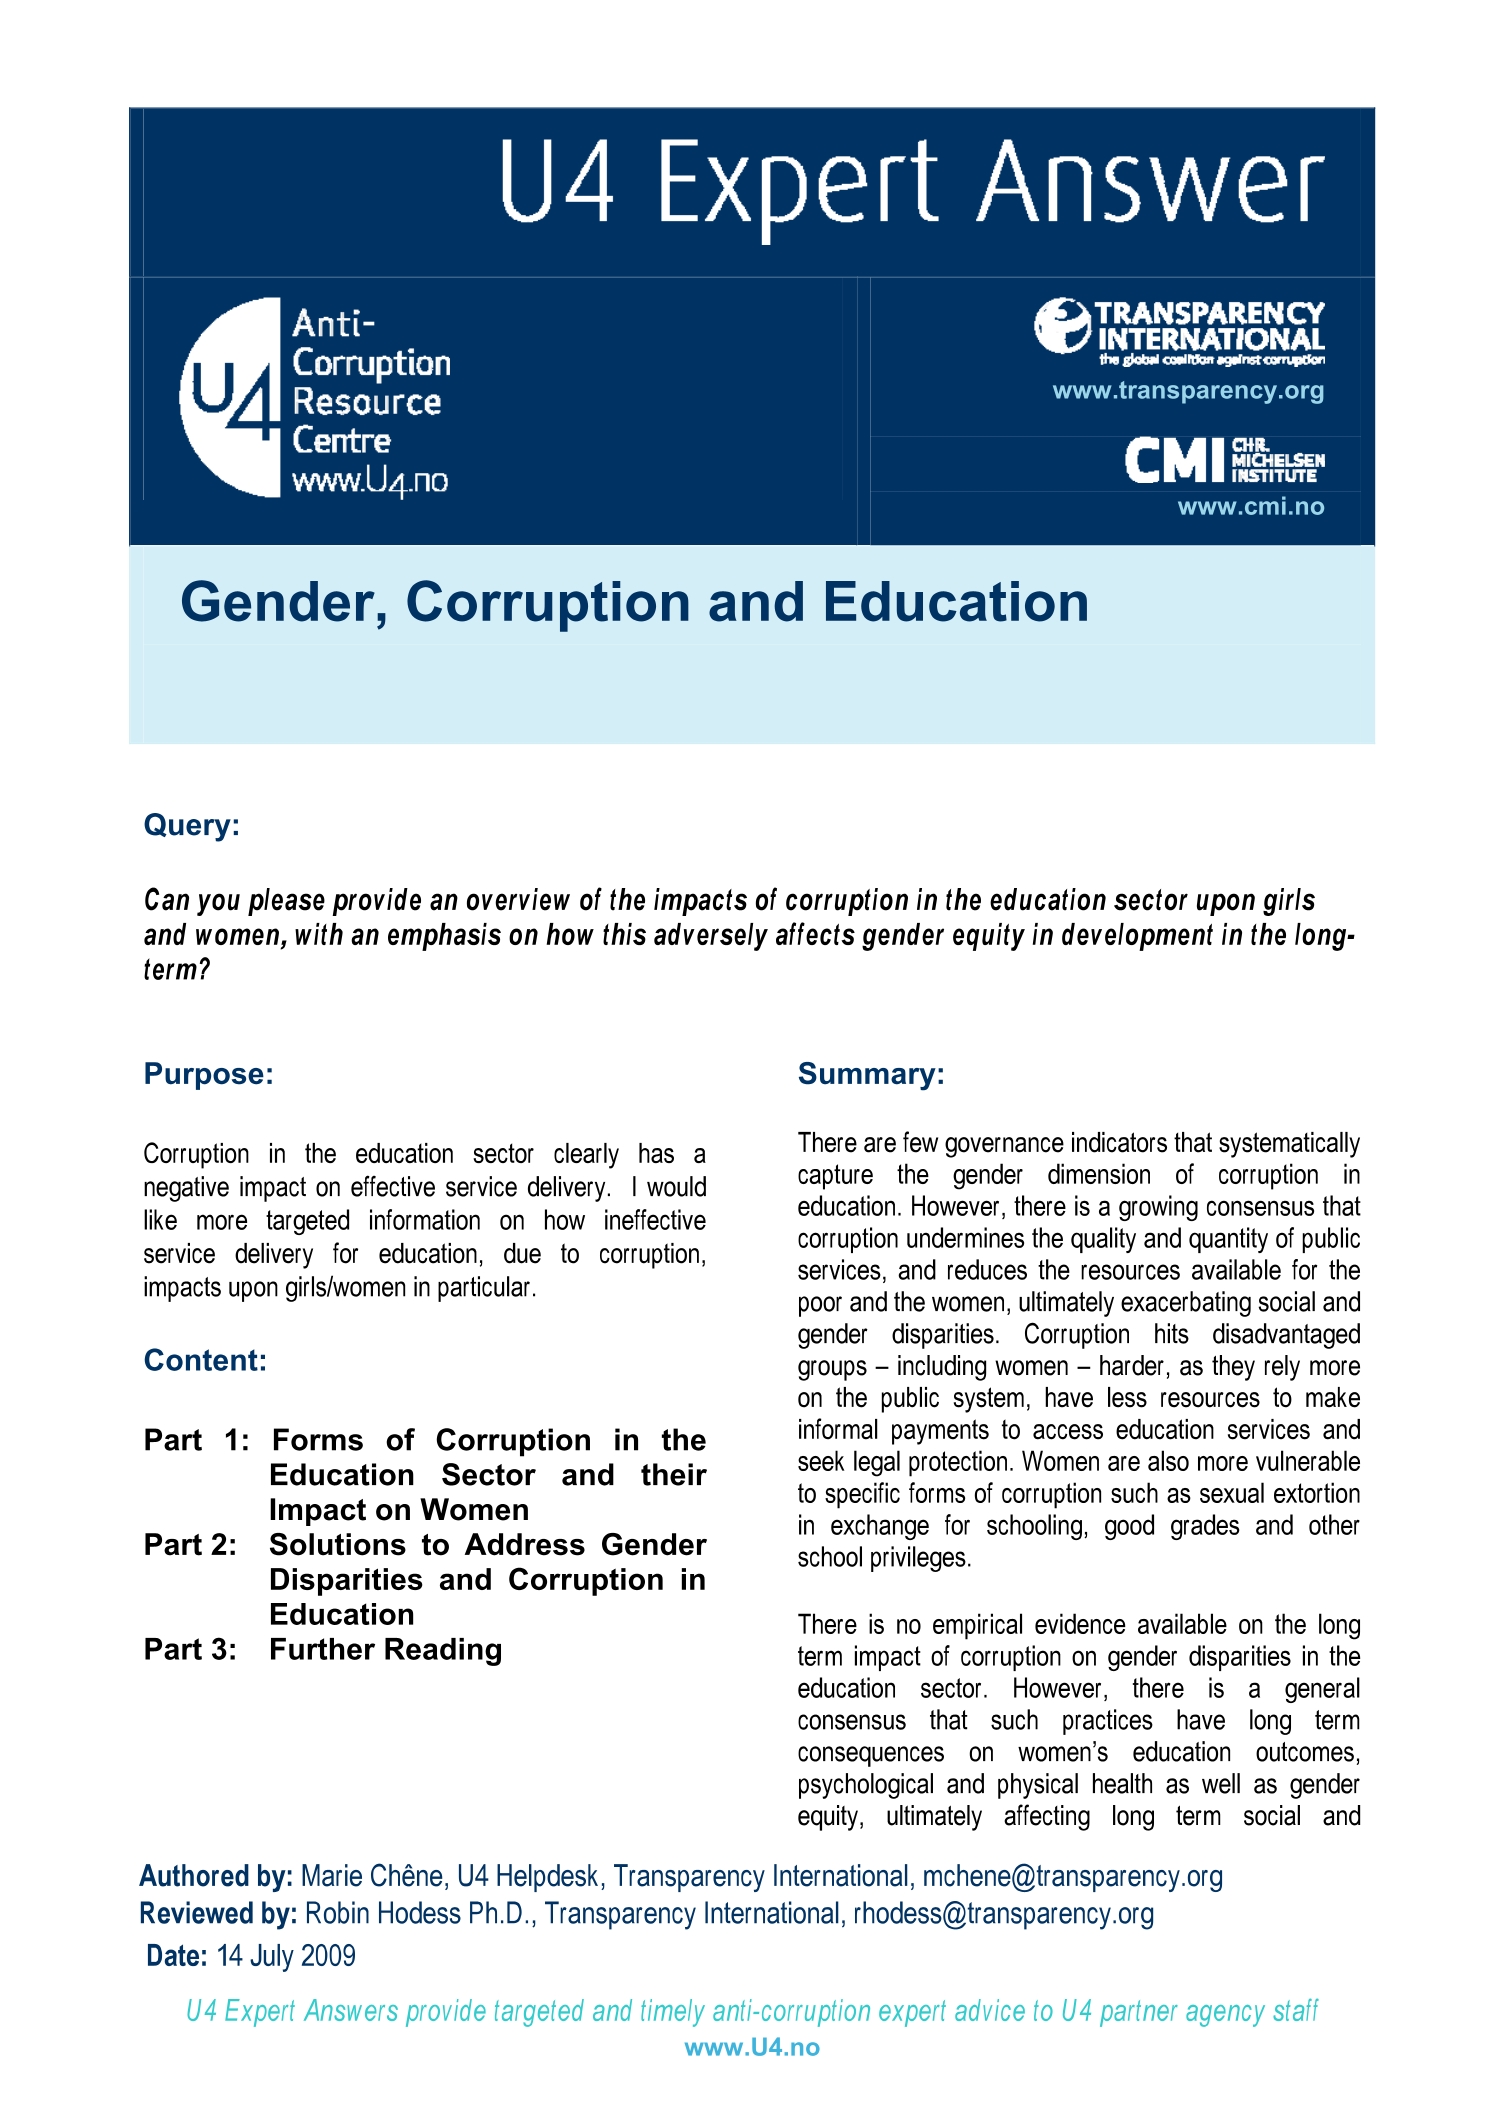 Gender, corruption and education